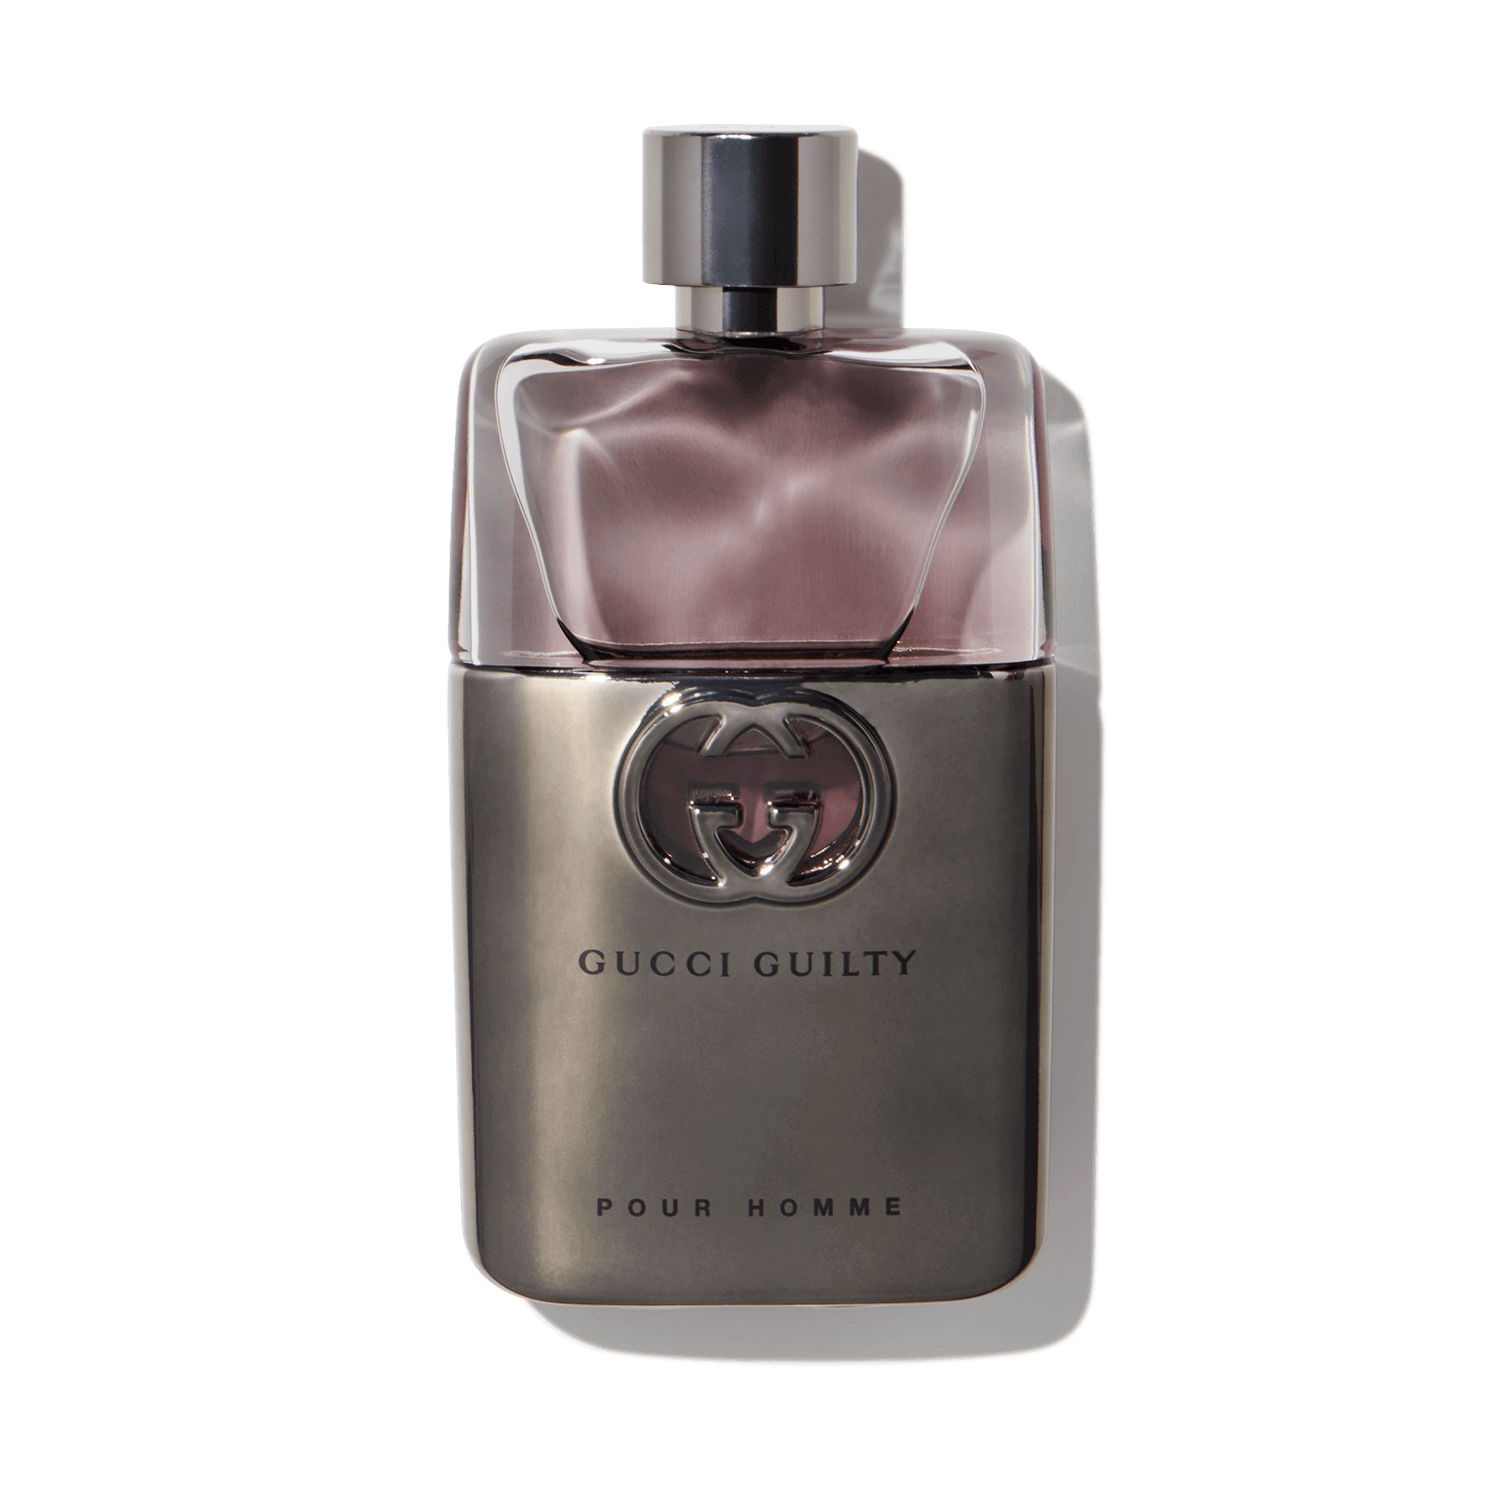 Get GUCCI Guilty Pour Homme Scentbird for $16.95